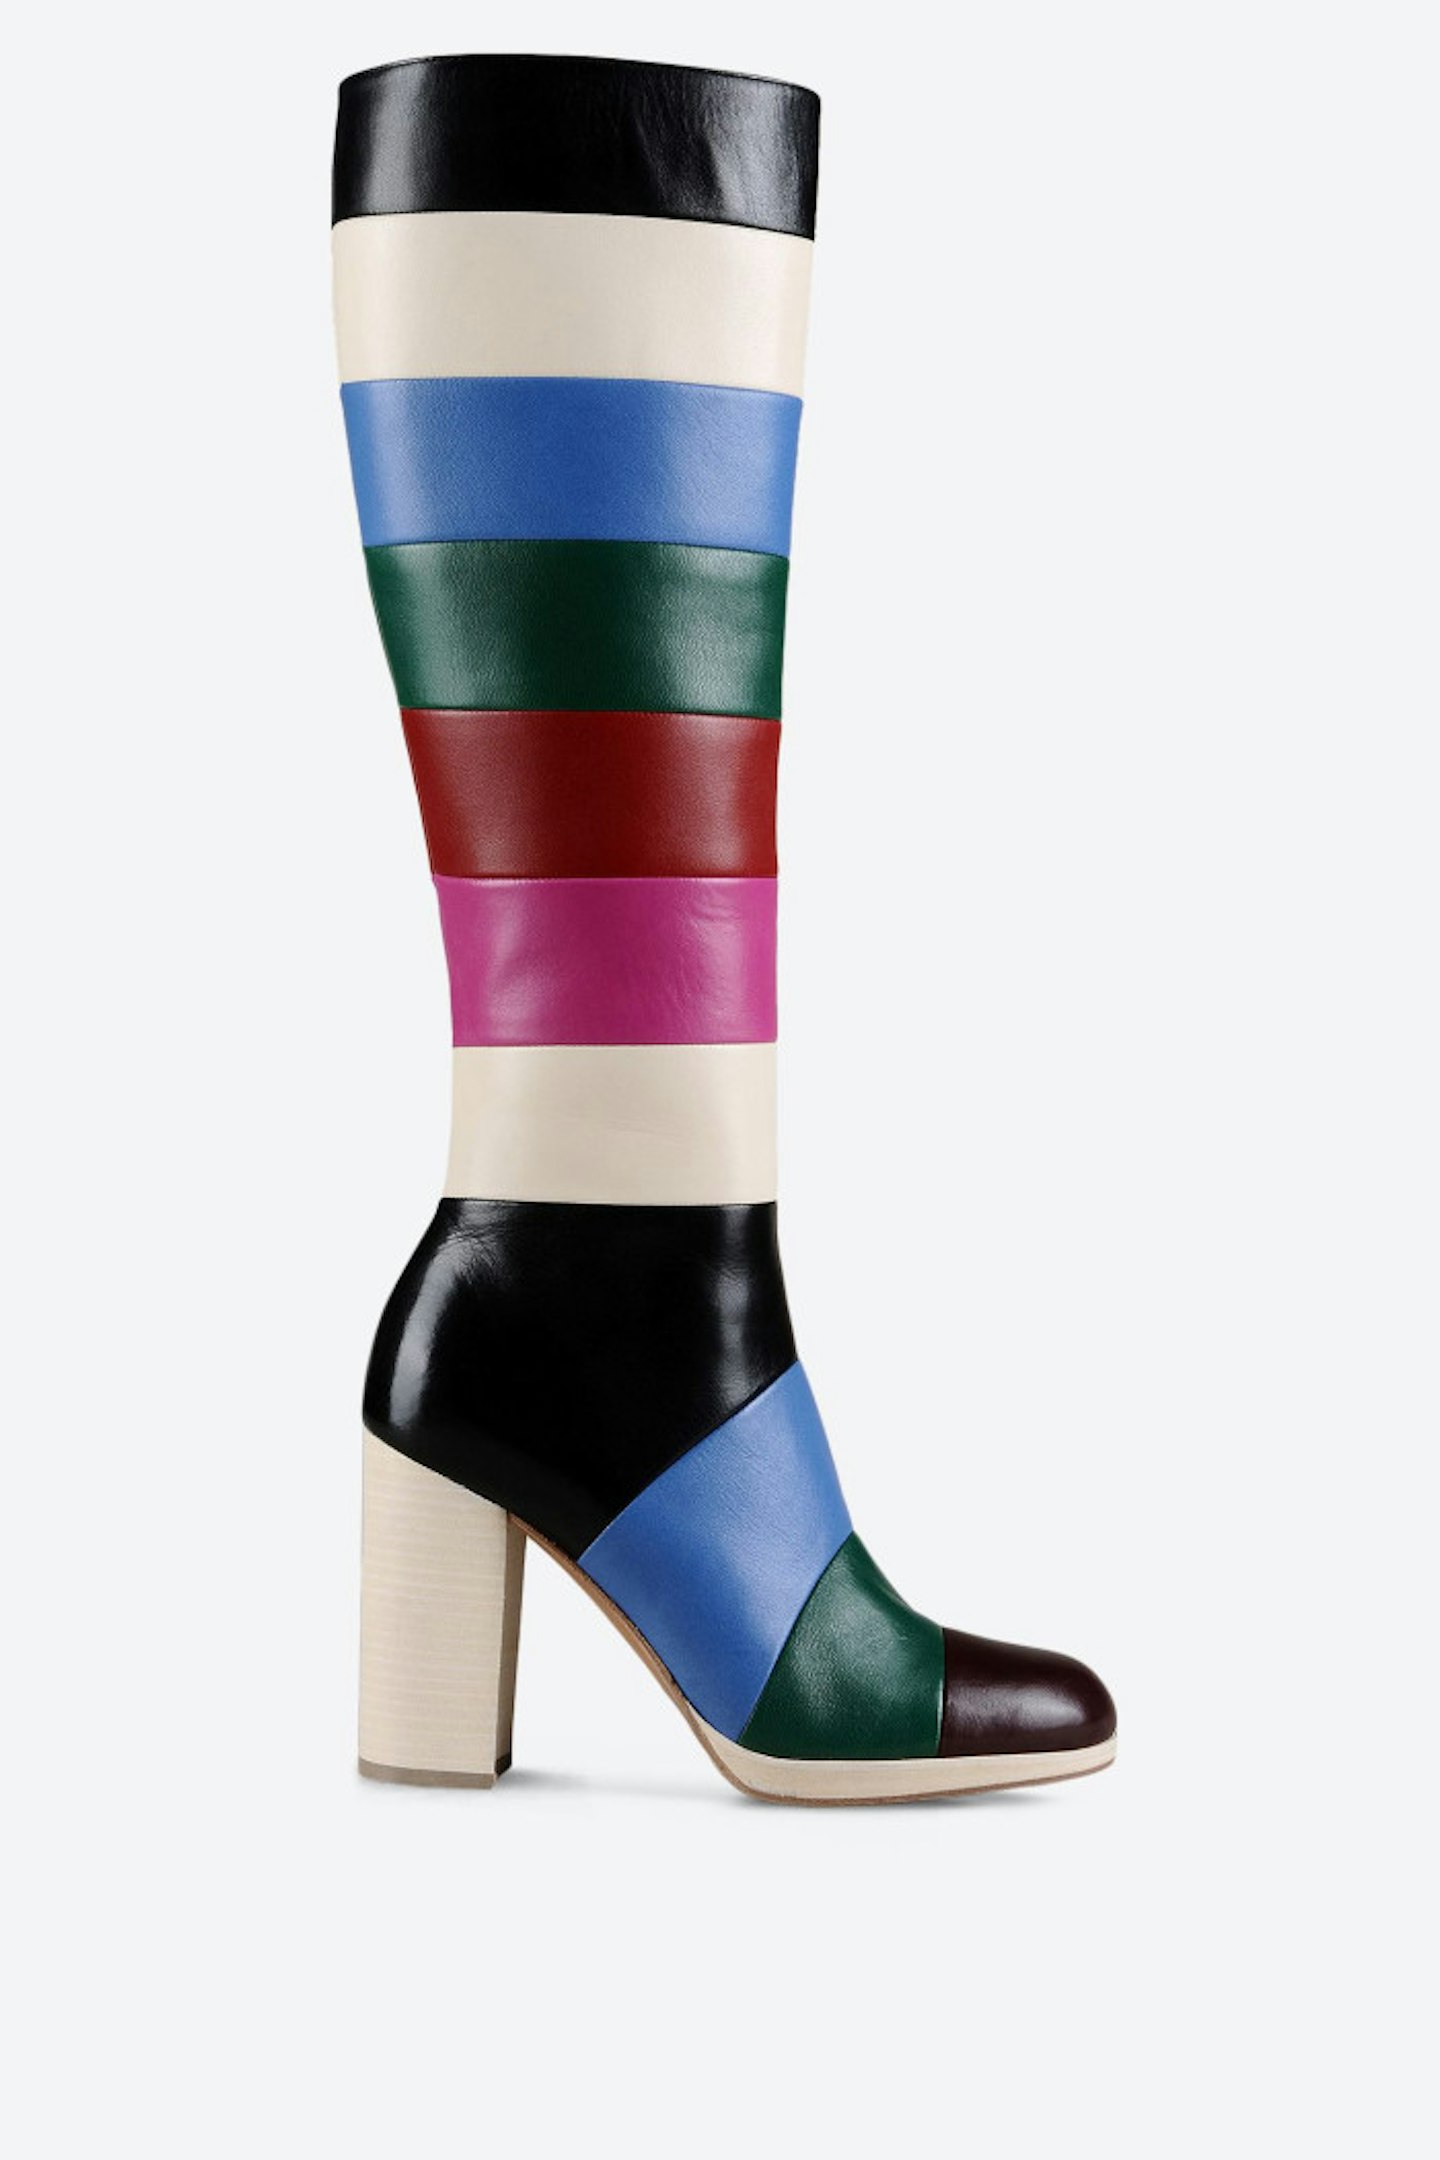 Valentino Striped Leather Boot, £1,155.00